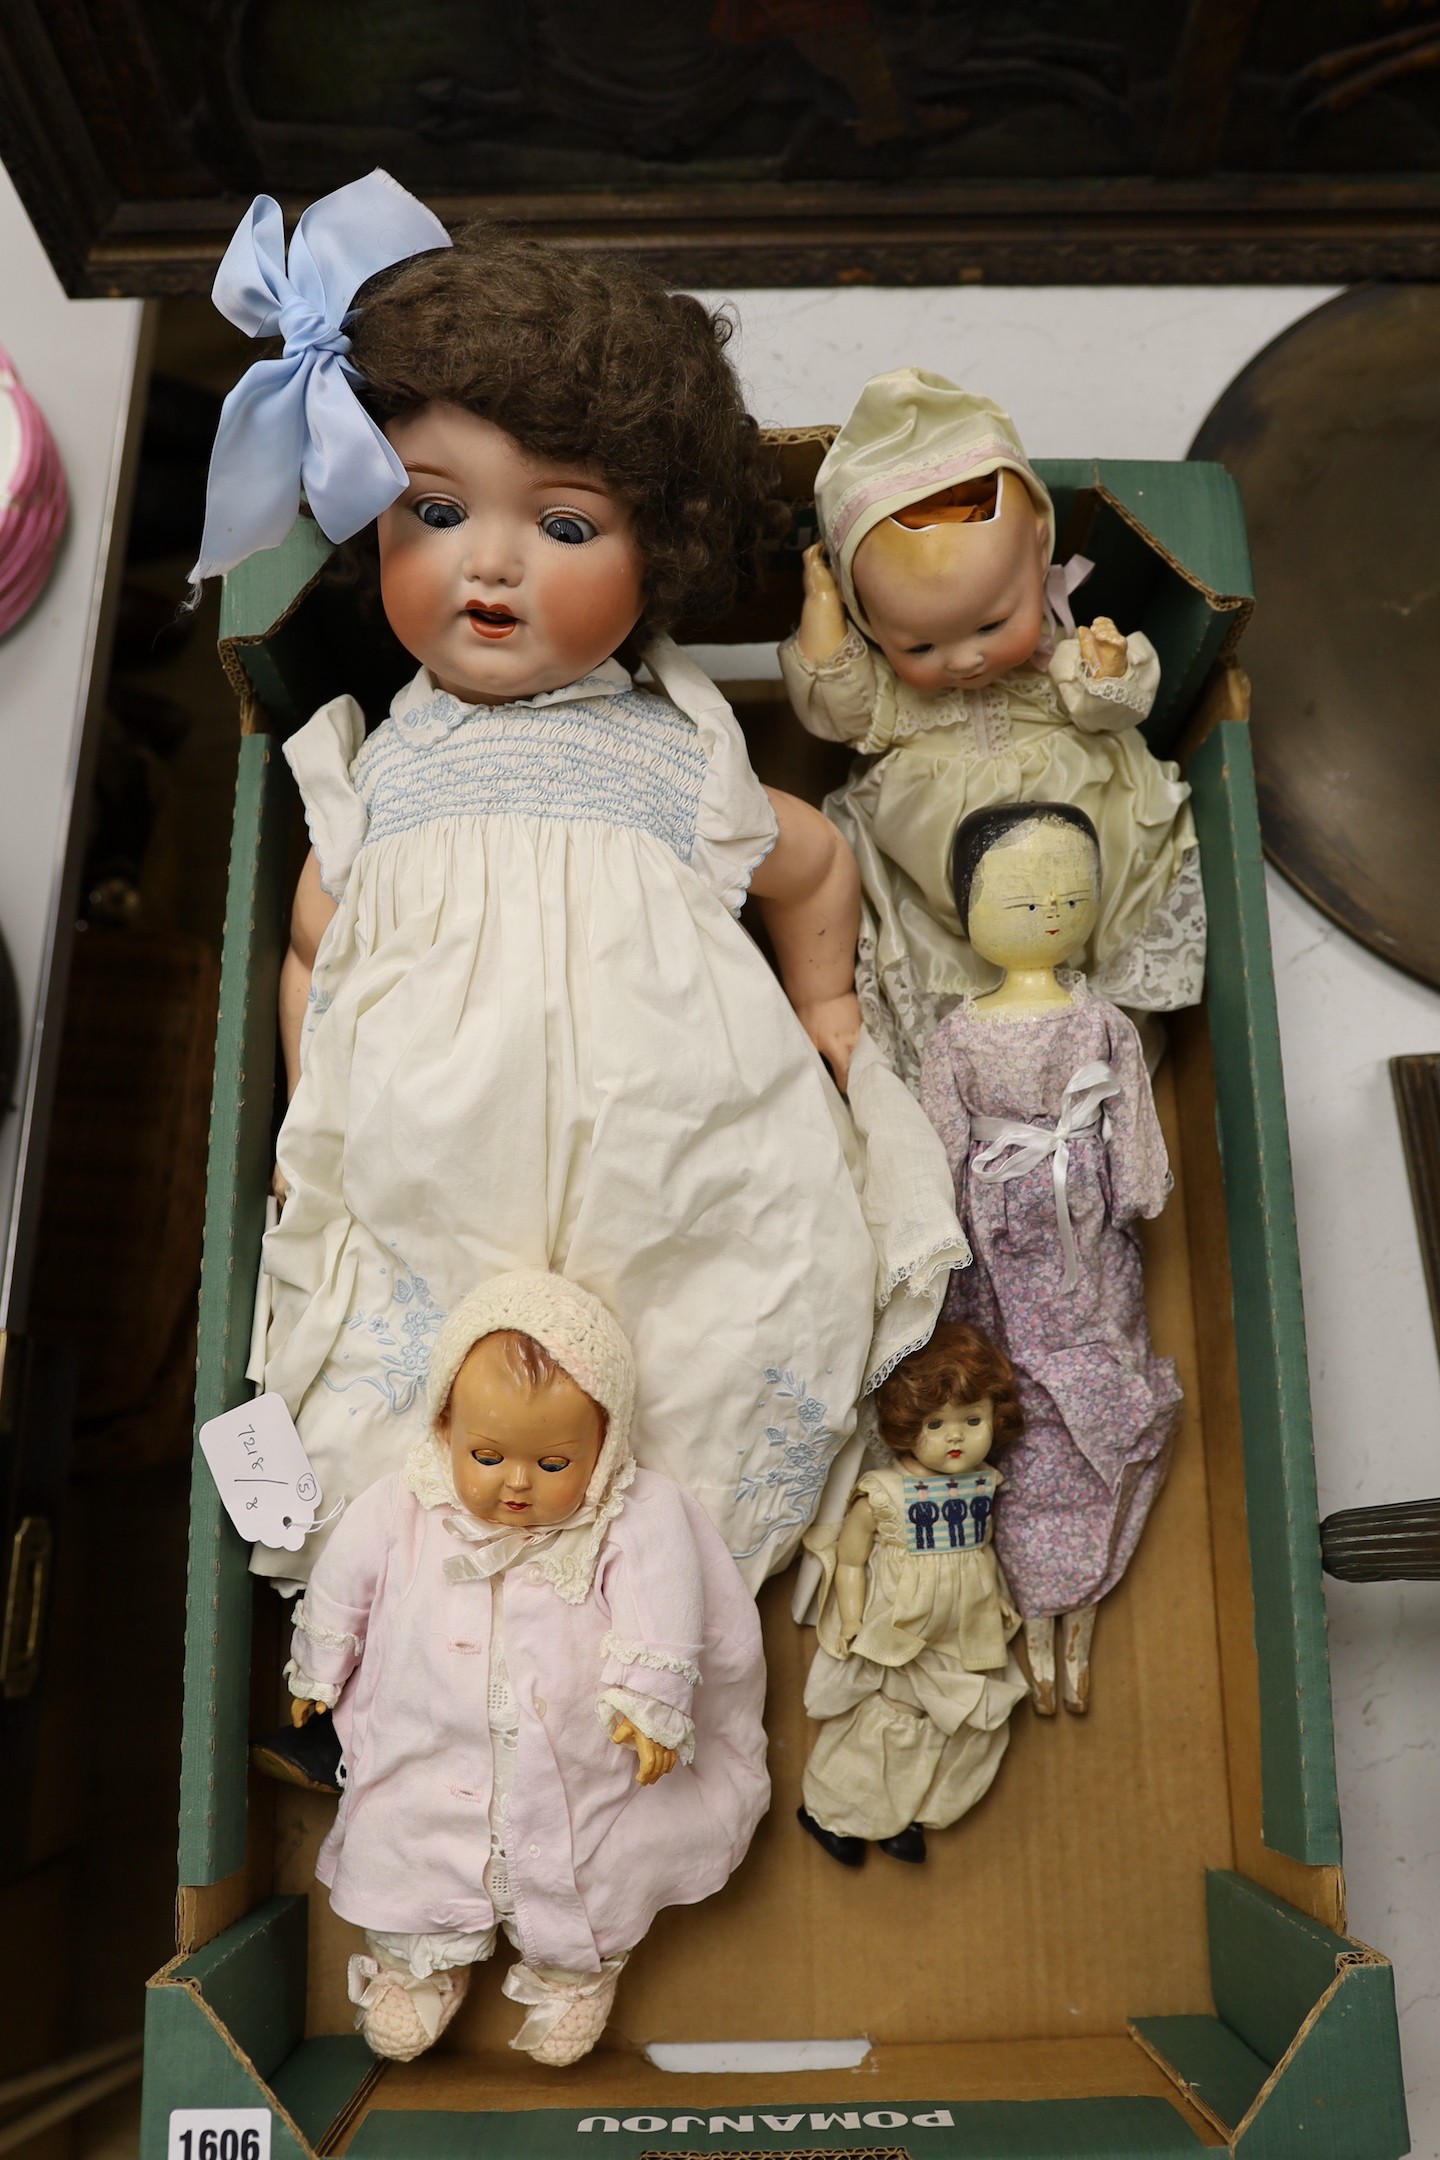 An Armand Marseille open mouthed bisque headed doll, another smaller bisque headed doll, a peg doll and two celluloid dolls